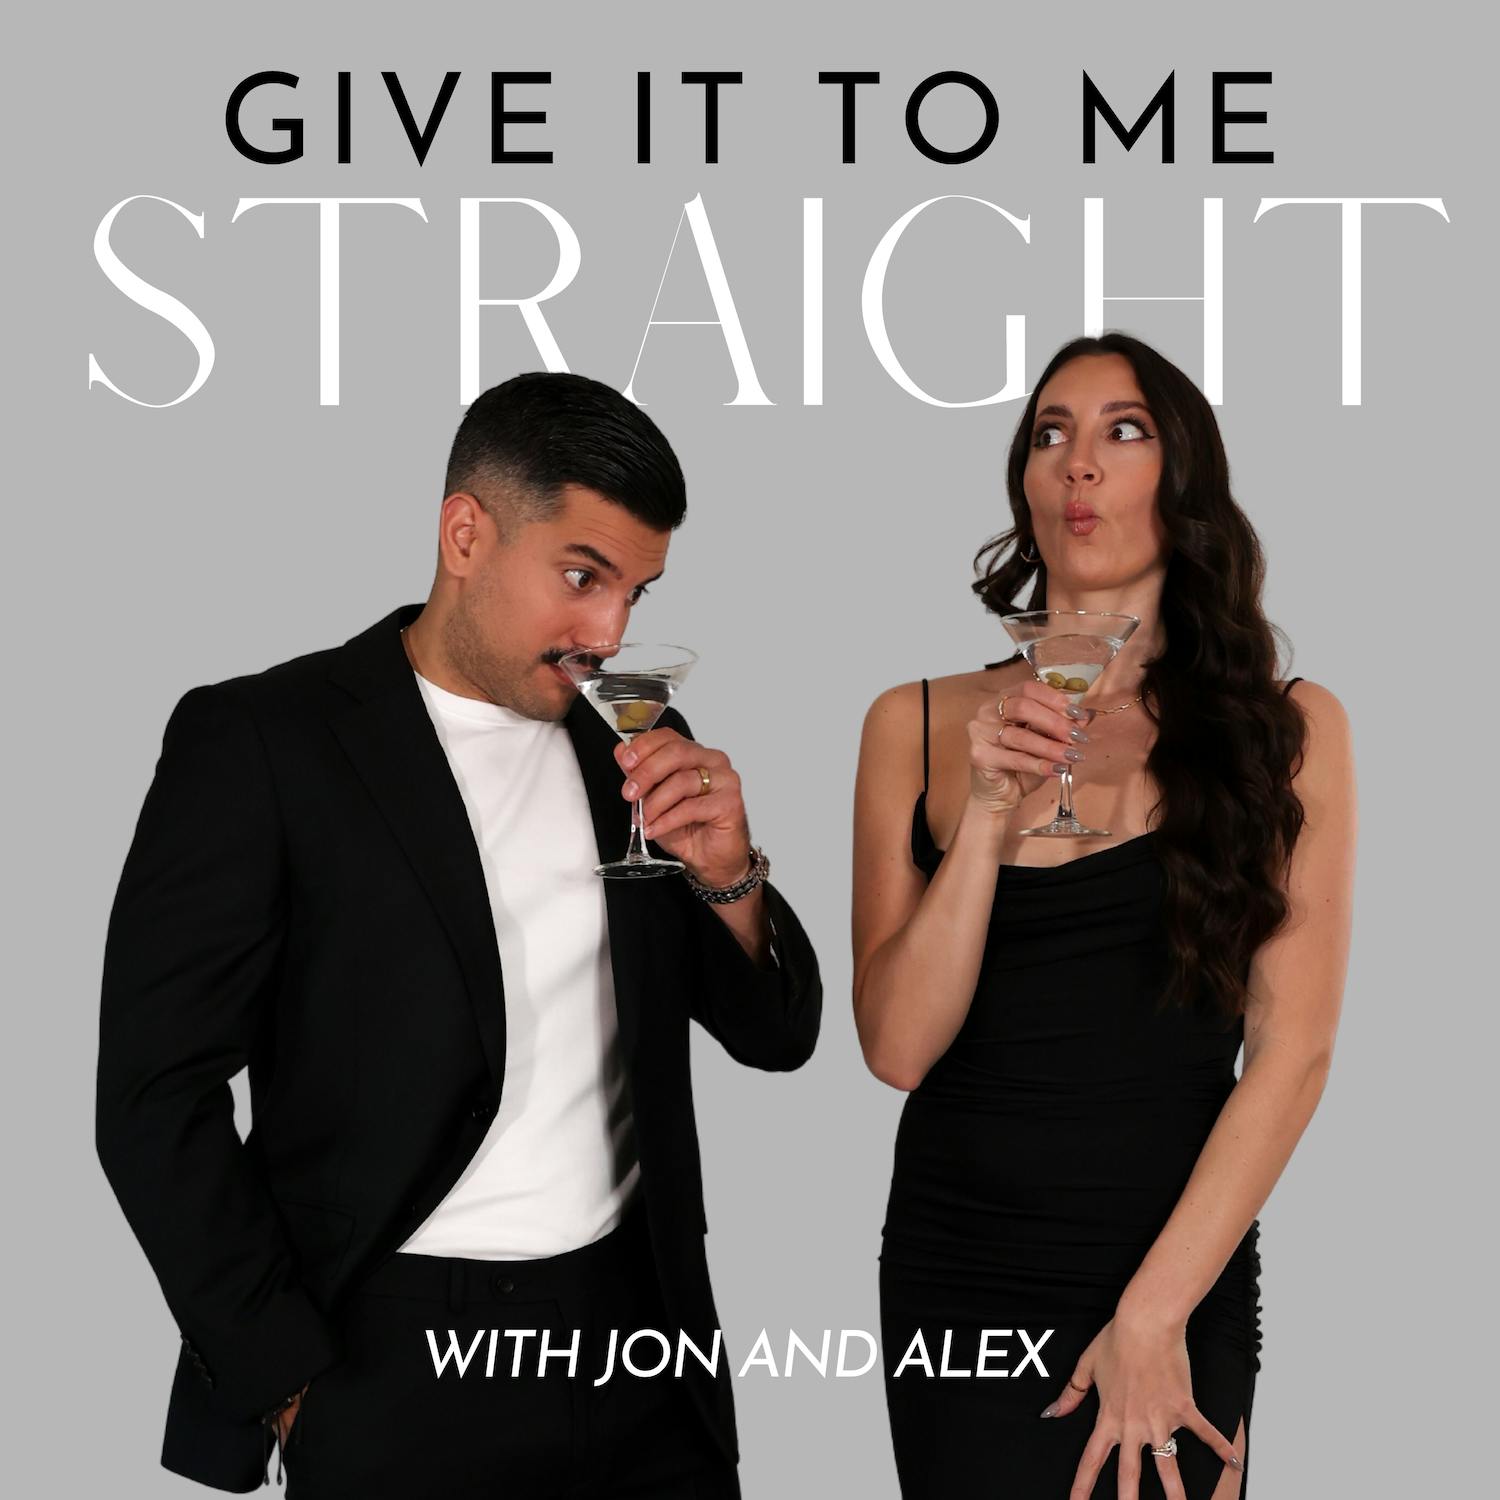 10. How Much Should You Share With Your Partner? by Give It To Me Straight